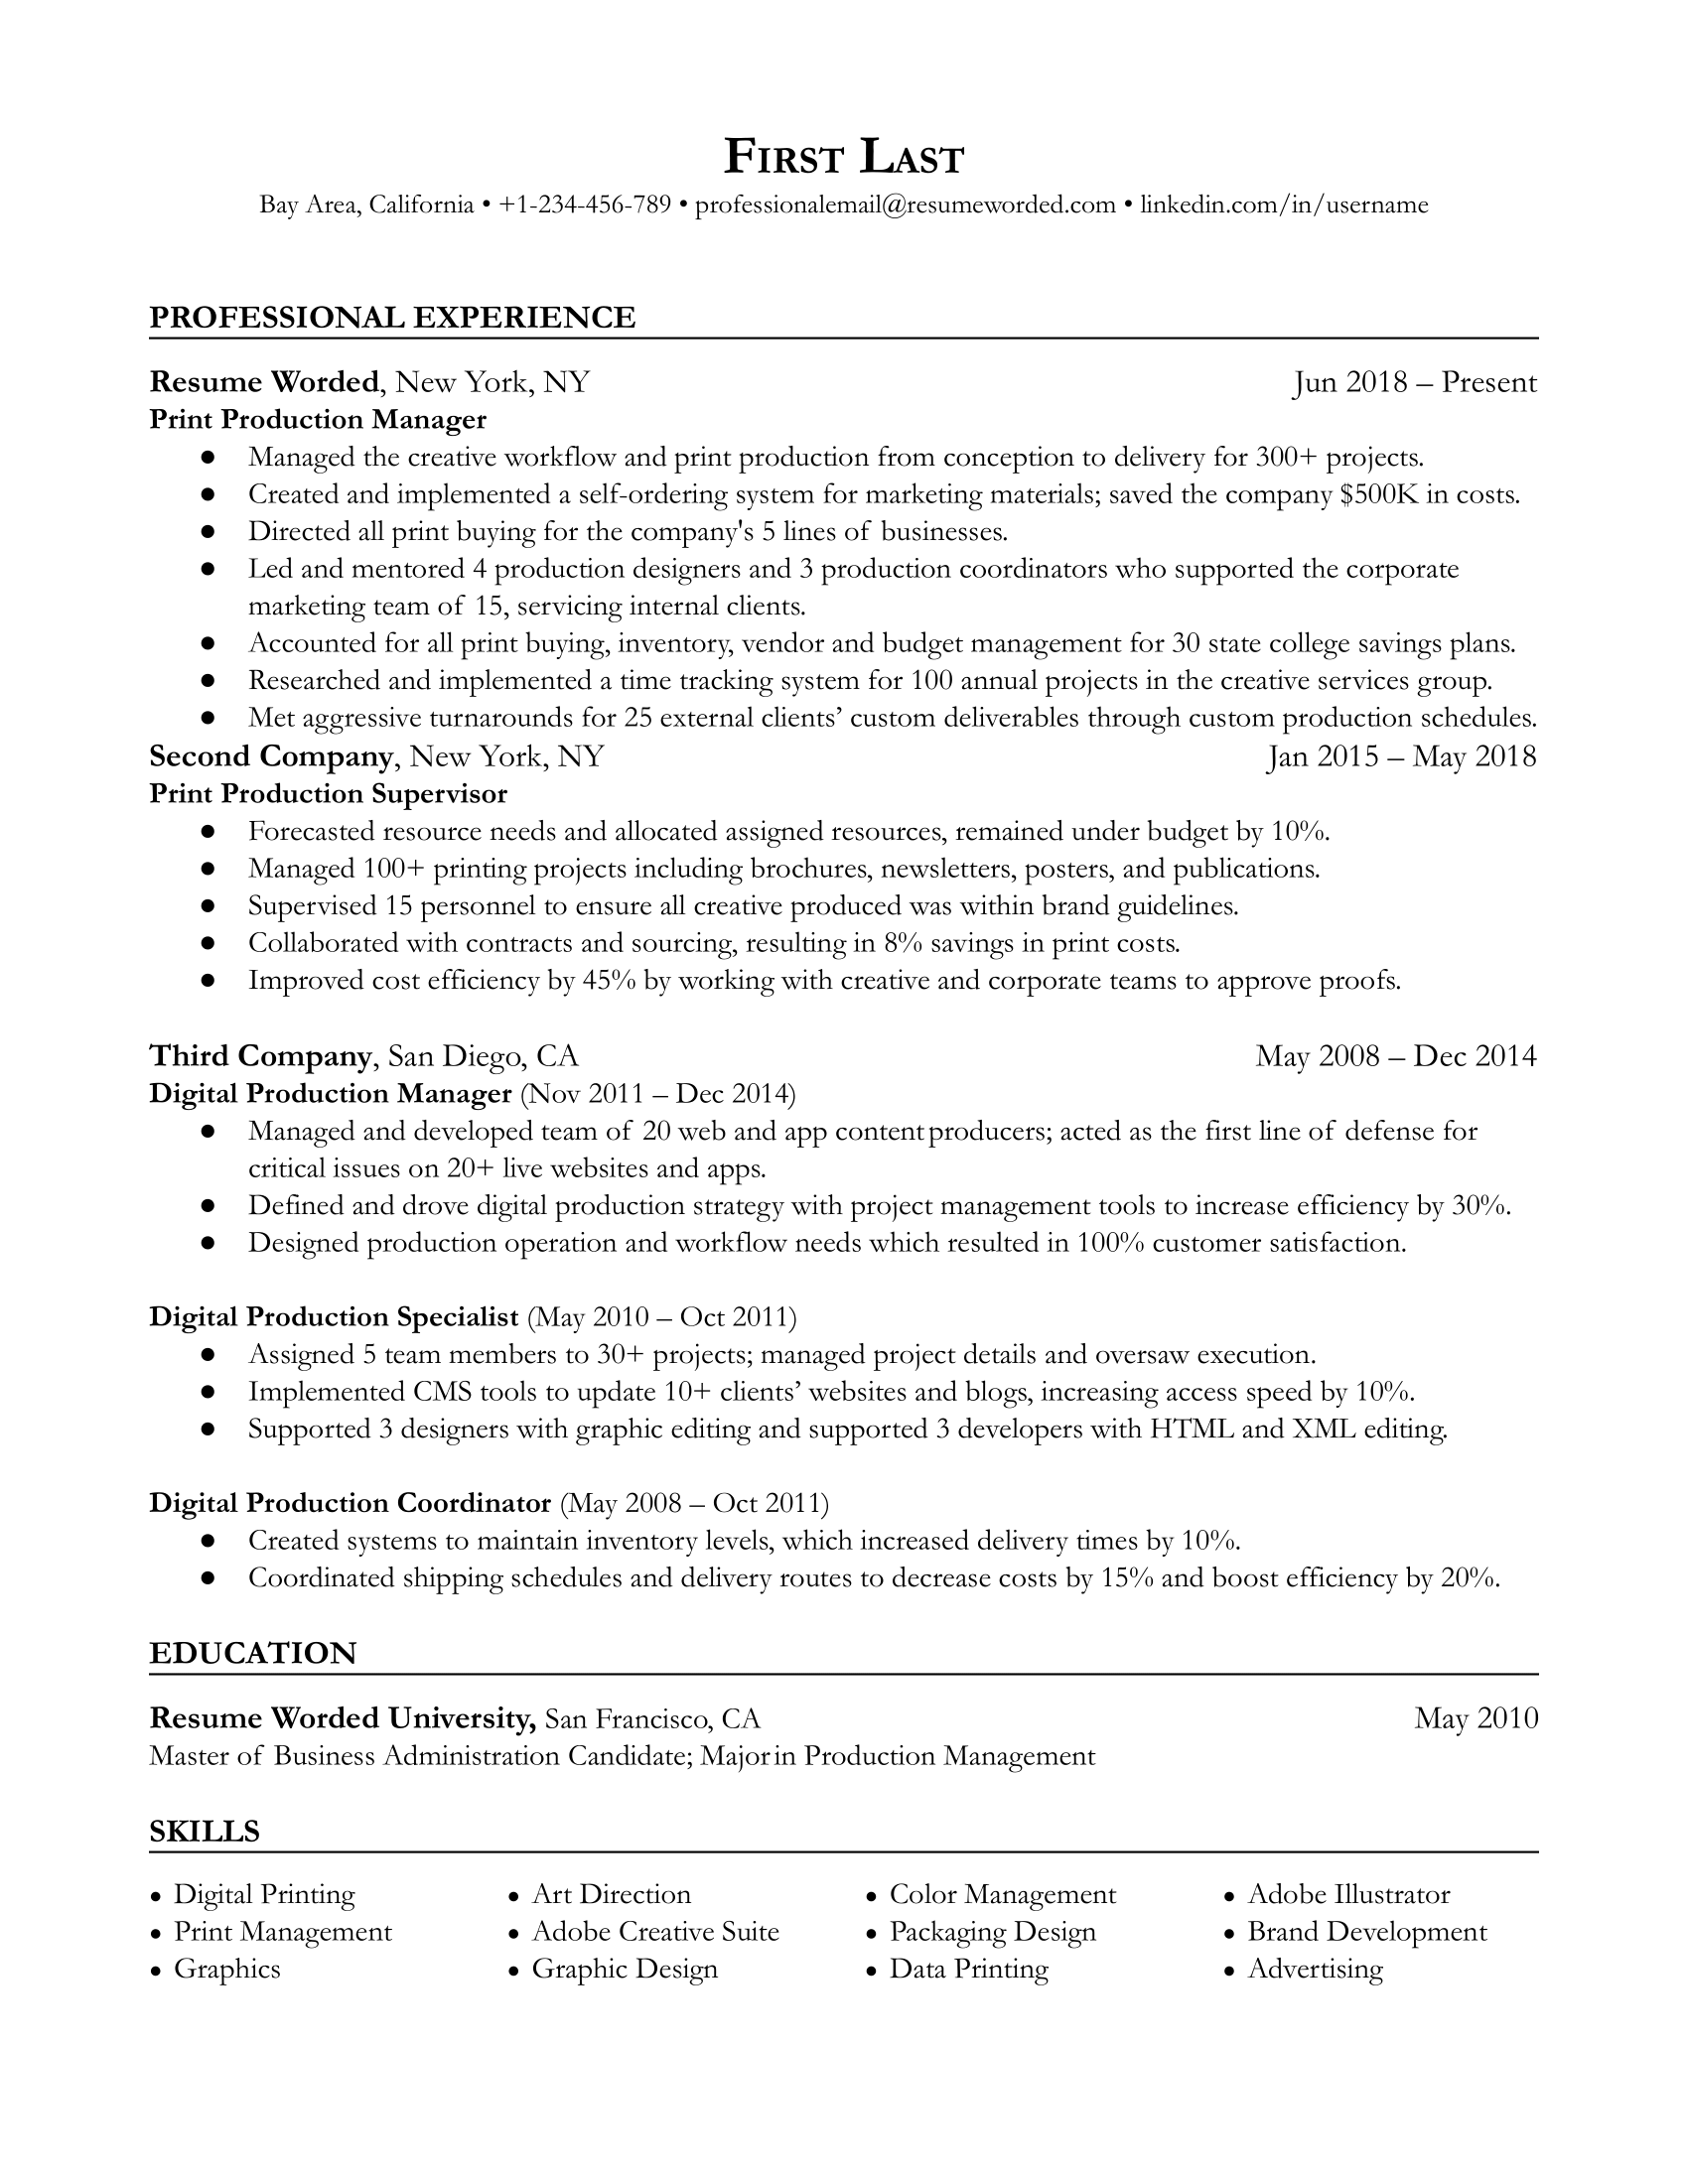 Print Production Manager Resume Template + Example